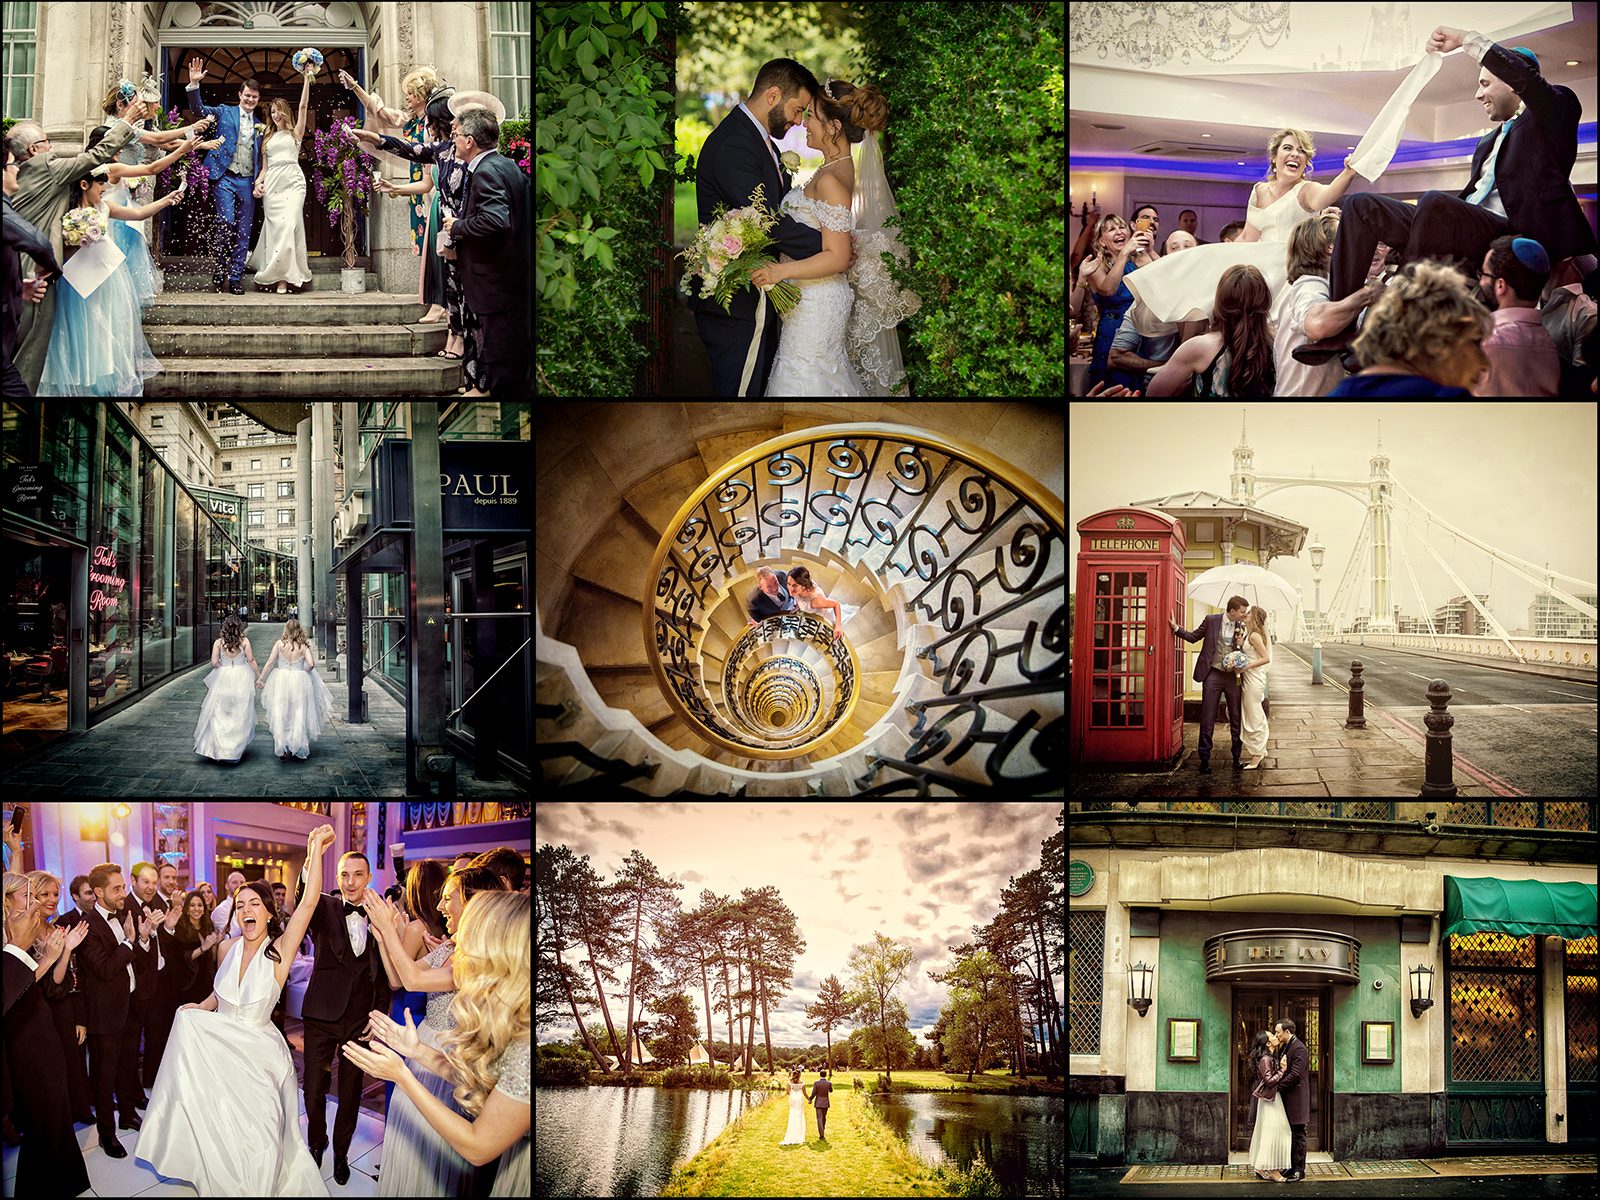 More of our favourite wedding images from in and around London in the past year London Wedding Photographers